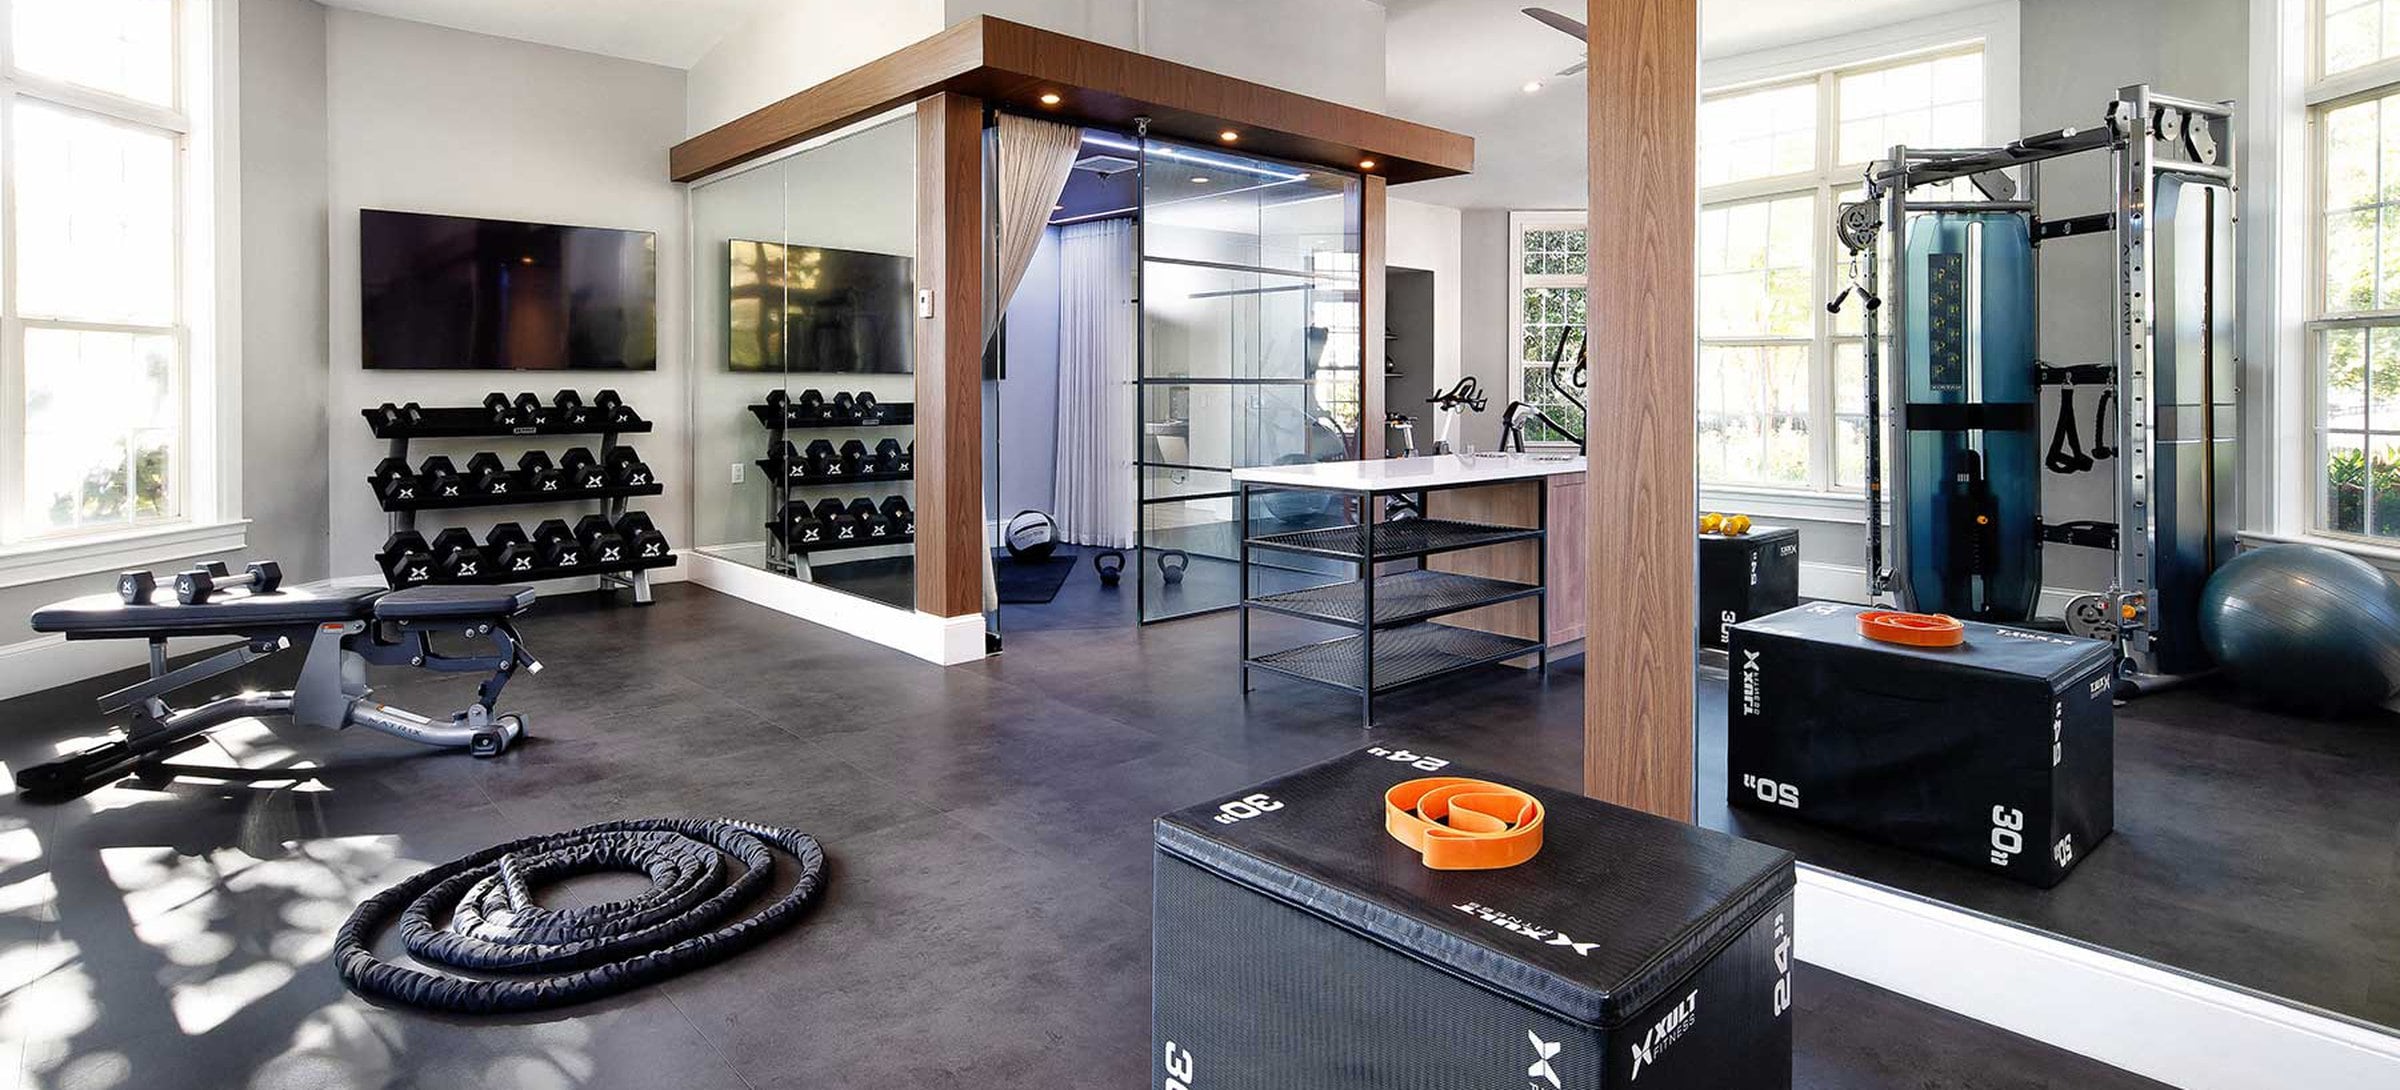 State-of-the-art fitness center  with free weights